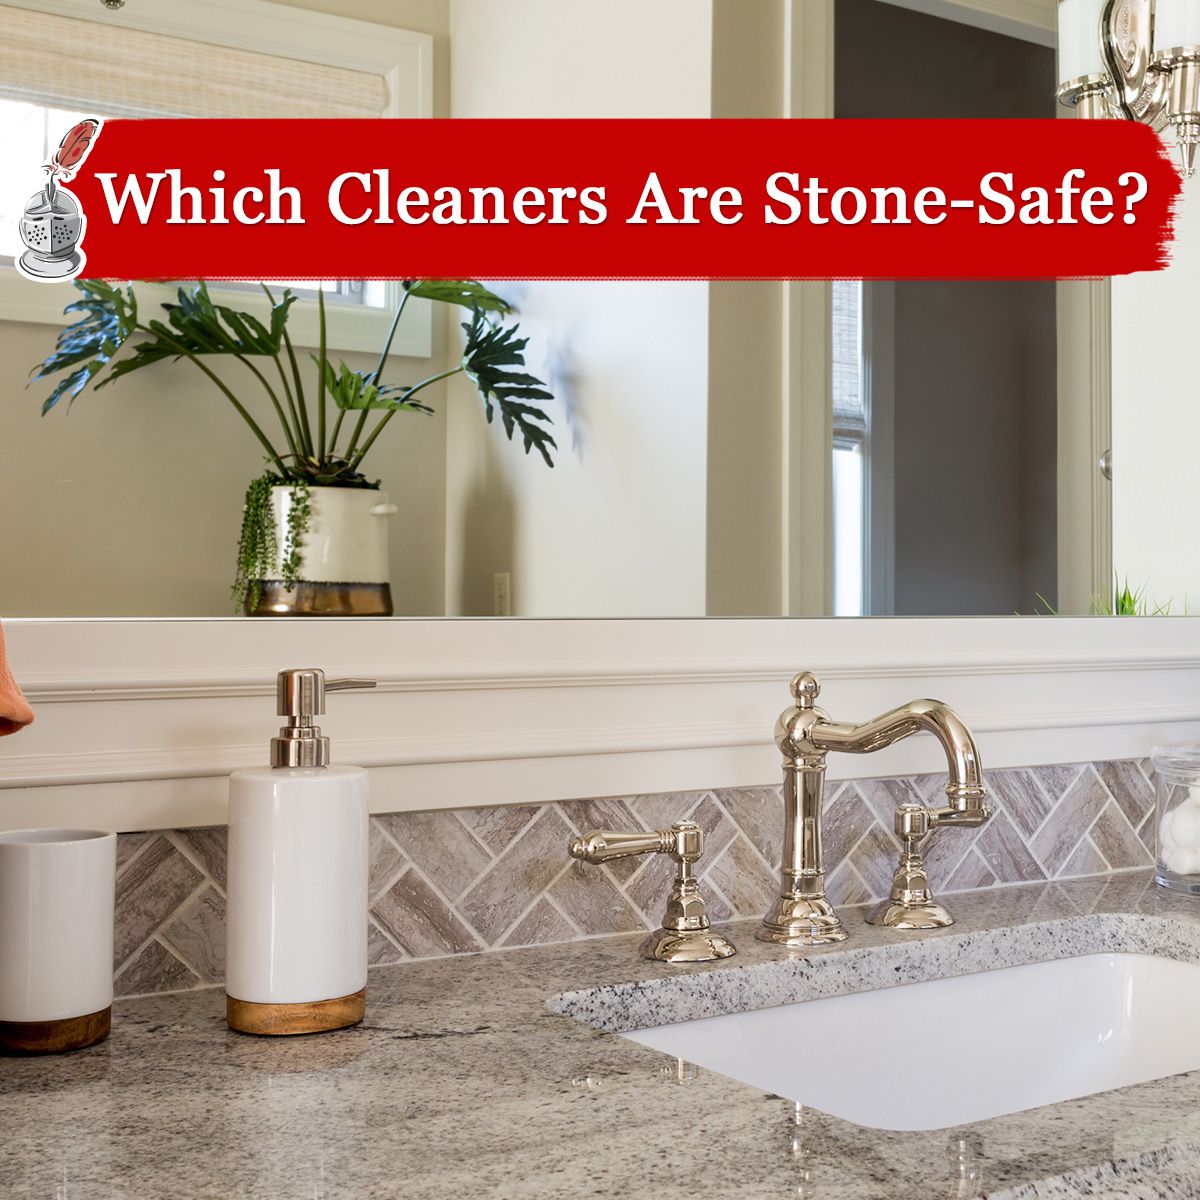 Which Cleaners Are Stone-Safe?